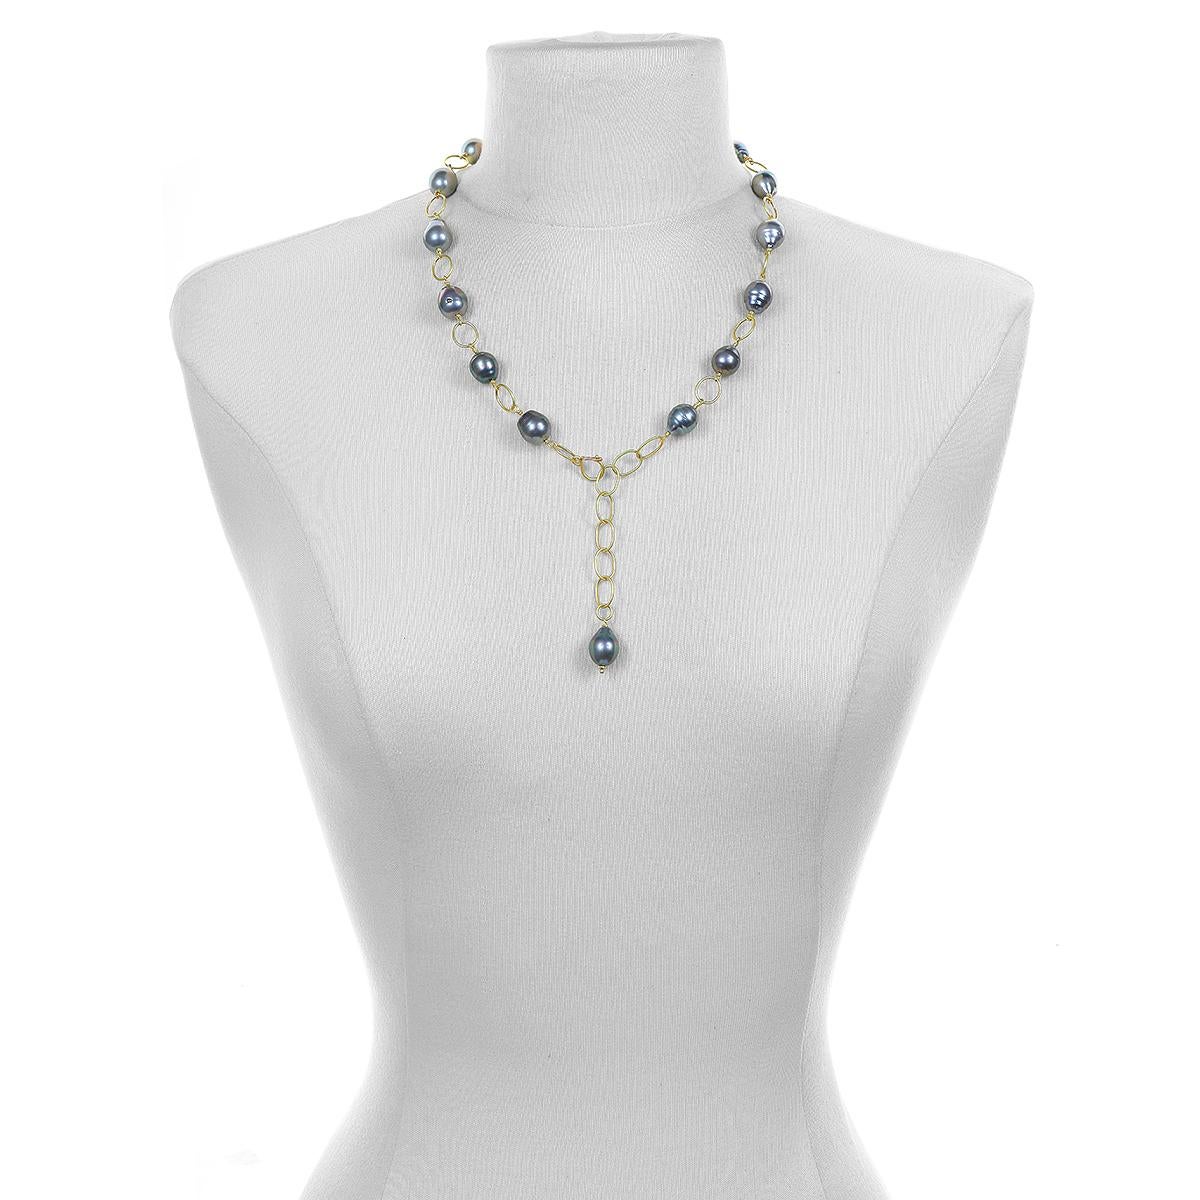 Faye Kim's 18 Karat Gold Black Tahitian Pearl Necklace is interspersed with gold links to give it lightness. Shown as a lariat in photos but can be worn without the lariat. Can also be layered with other necklaces and pendants or worn as a triple